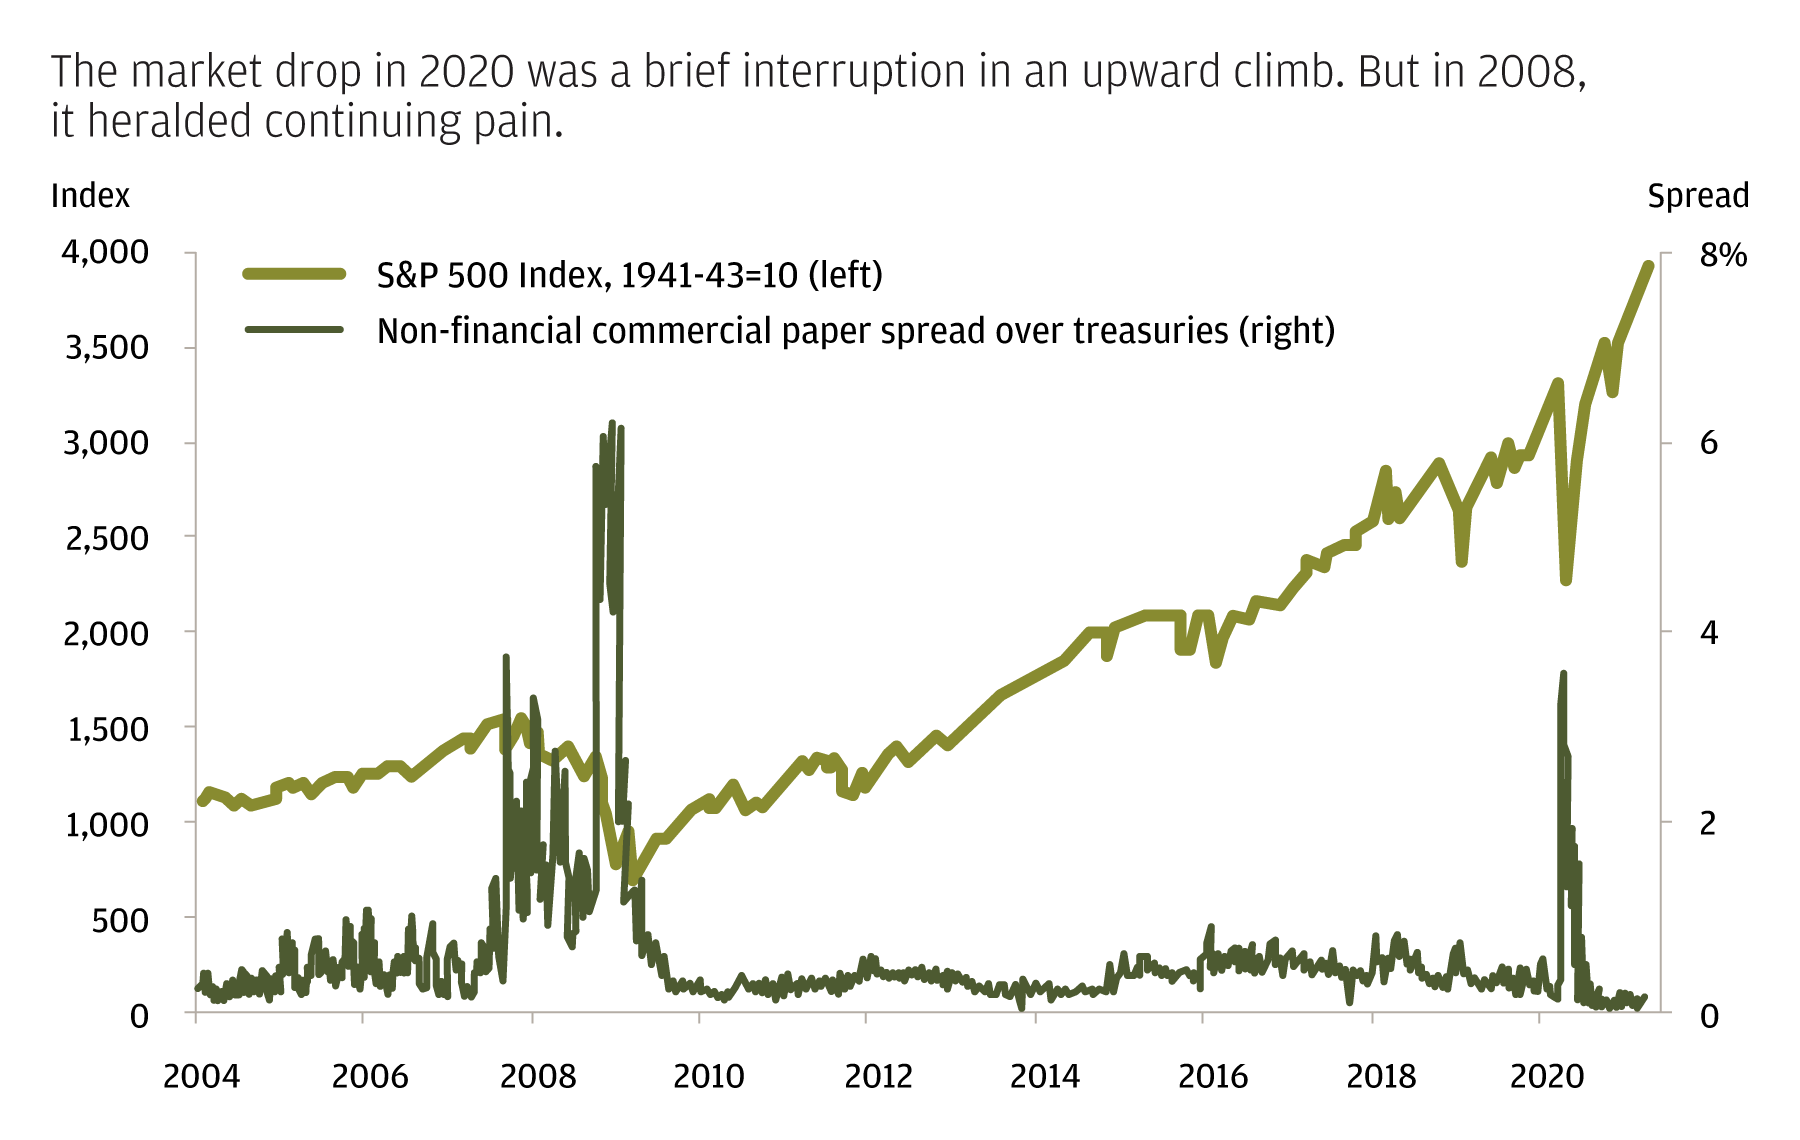 The market drop in 2020 was a brief interruption in an upward climb. But in 2008, it heralded continuing pain.